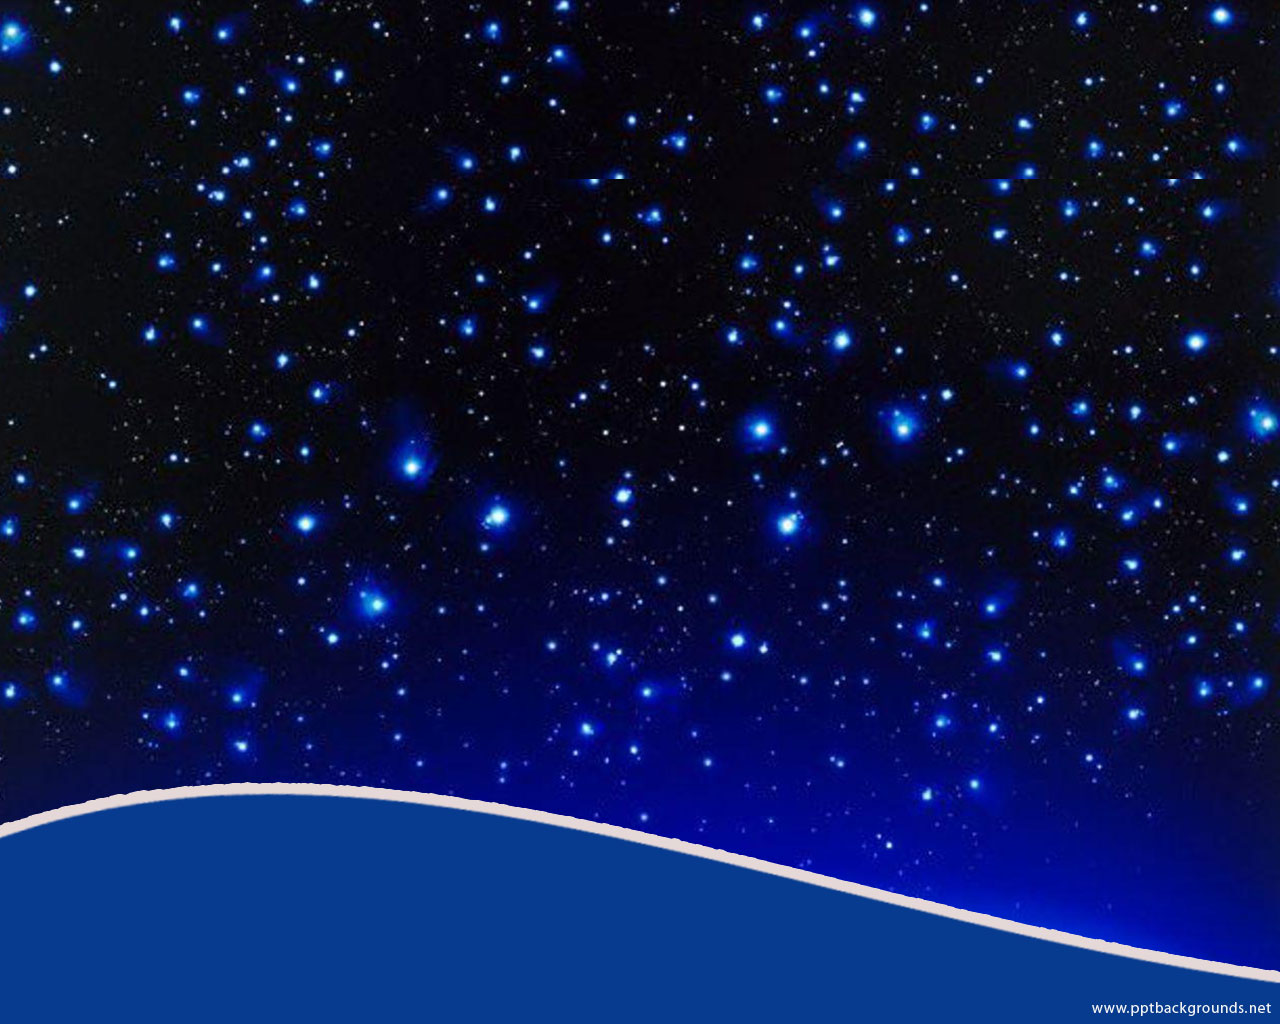 starry night clipart images - photo #15